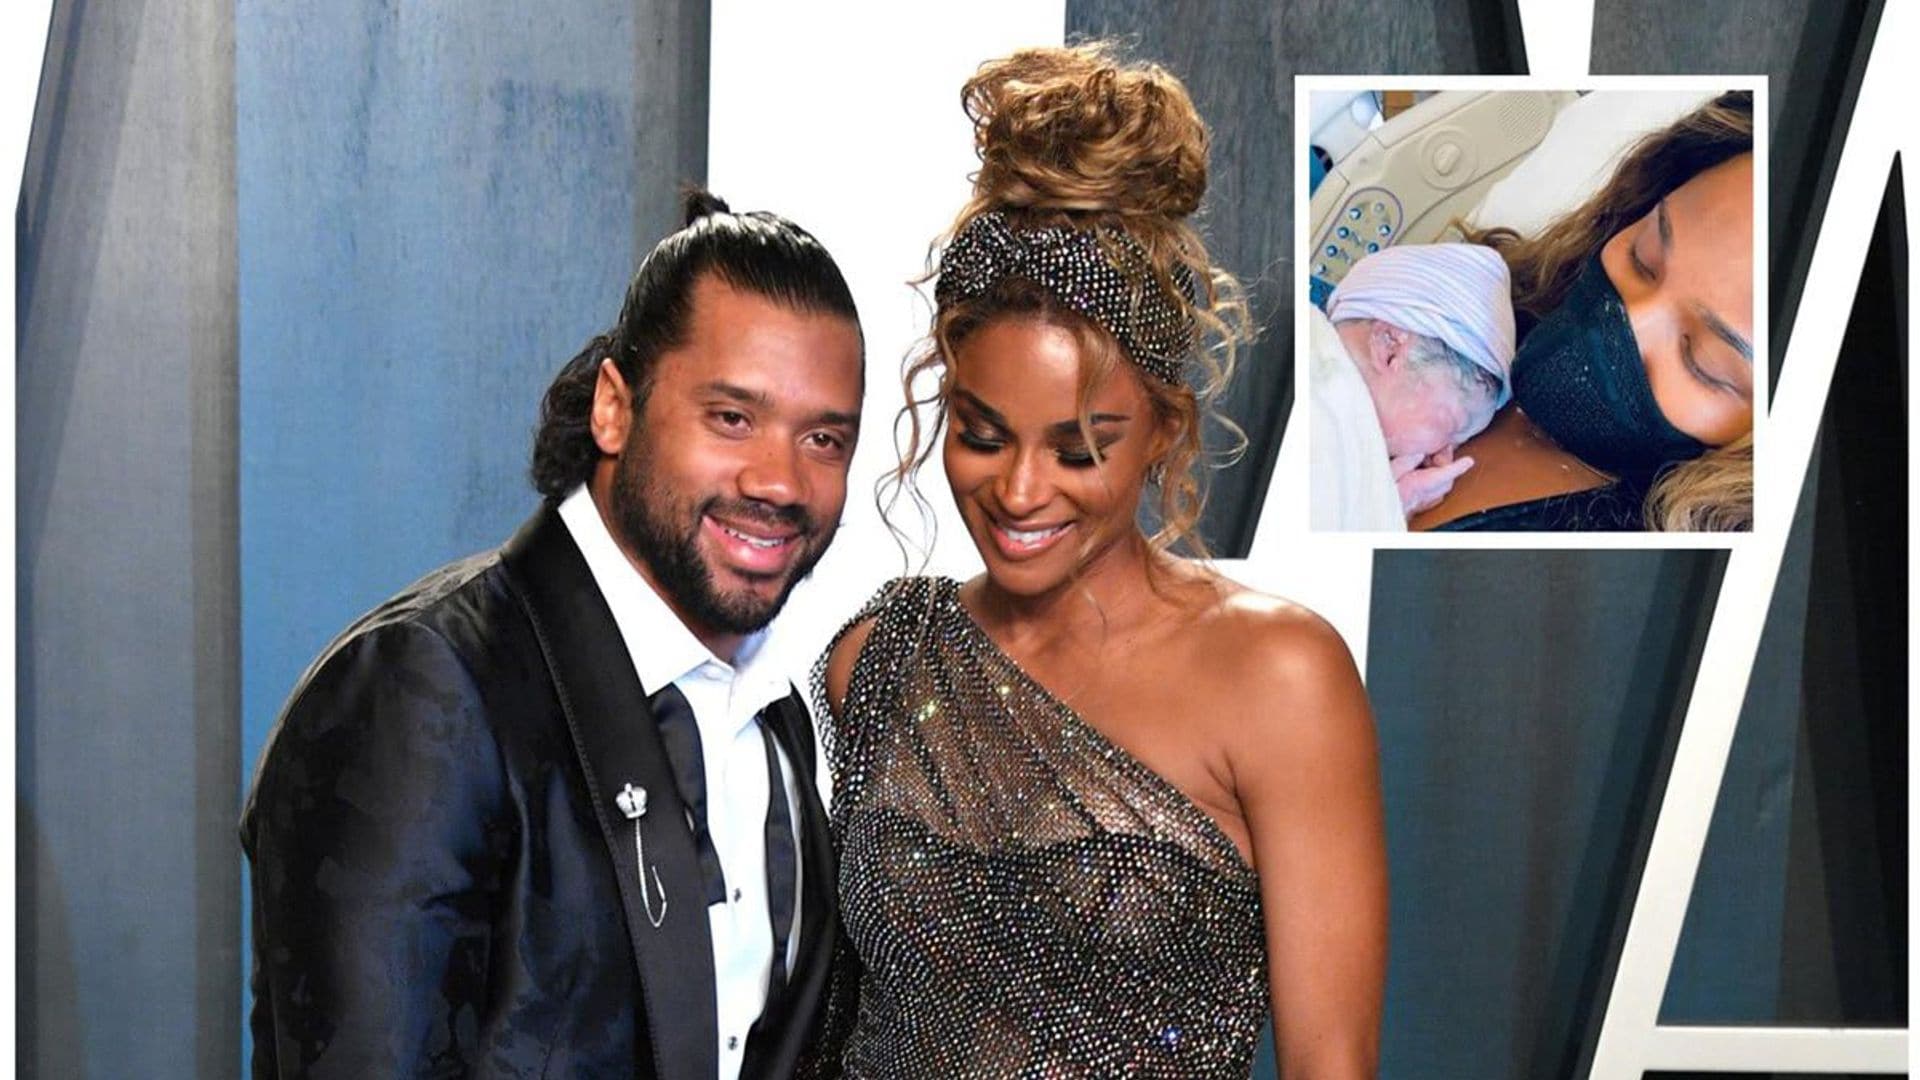 Ciara shares her surreal experience giving birth during pandemic